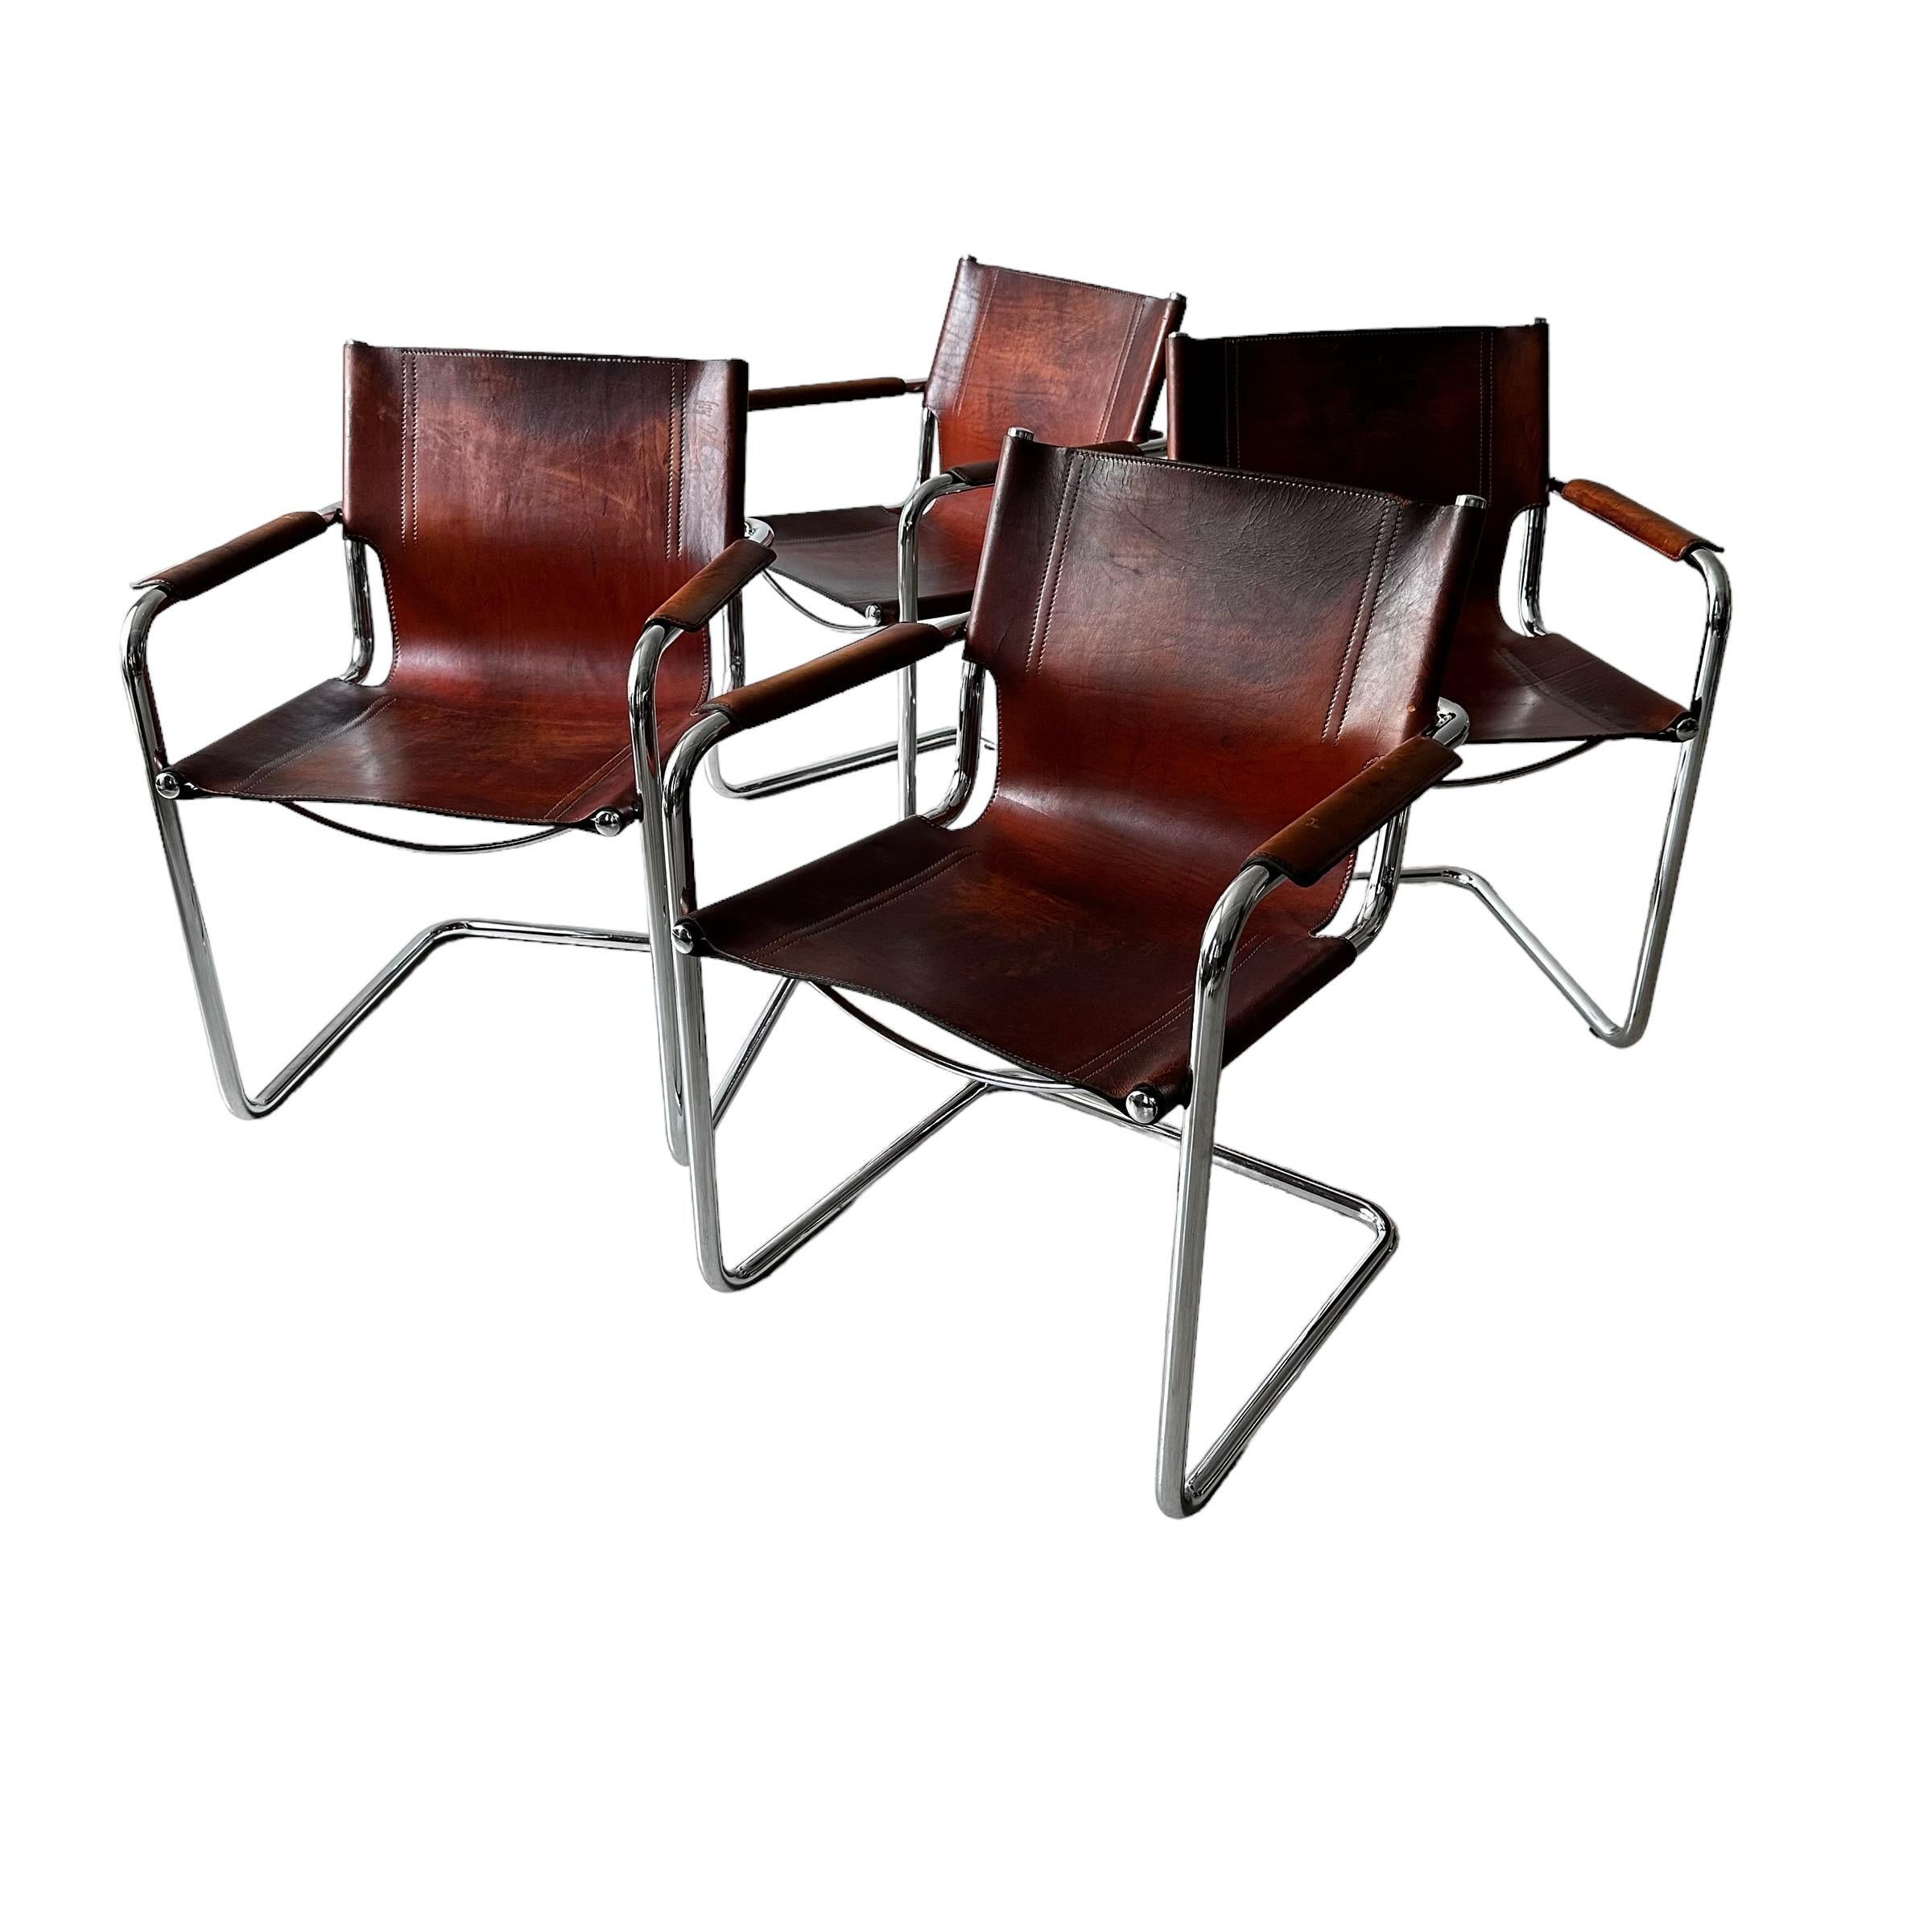 Matteo Grassi, Set of 4 Armchairs in Patinated Cognac Leather, Italy 1970s For Sale